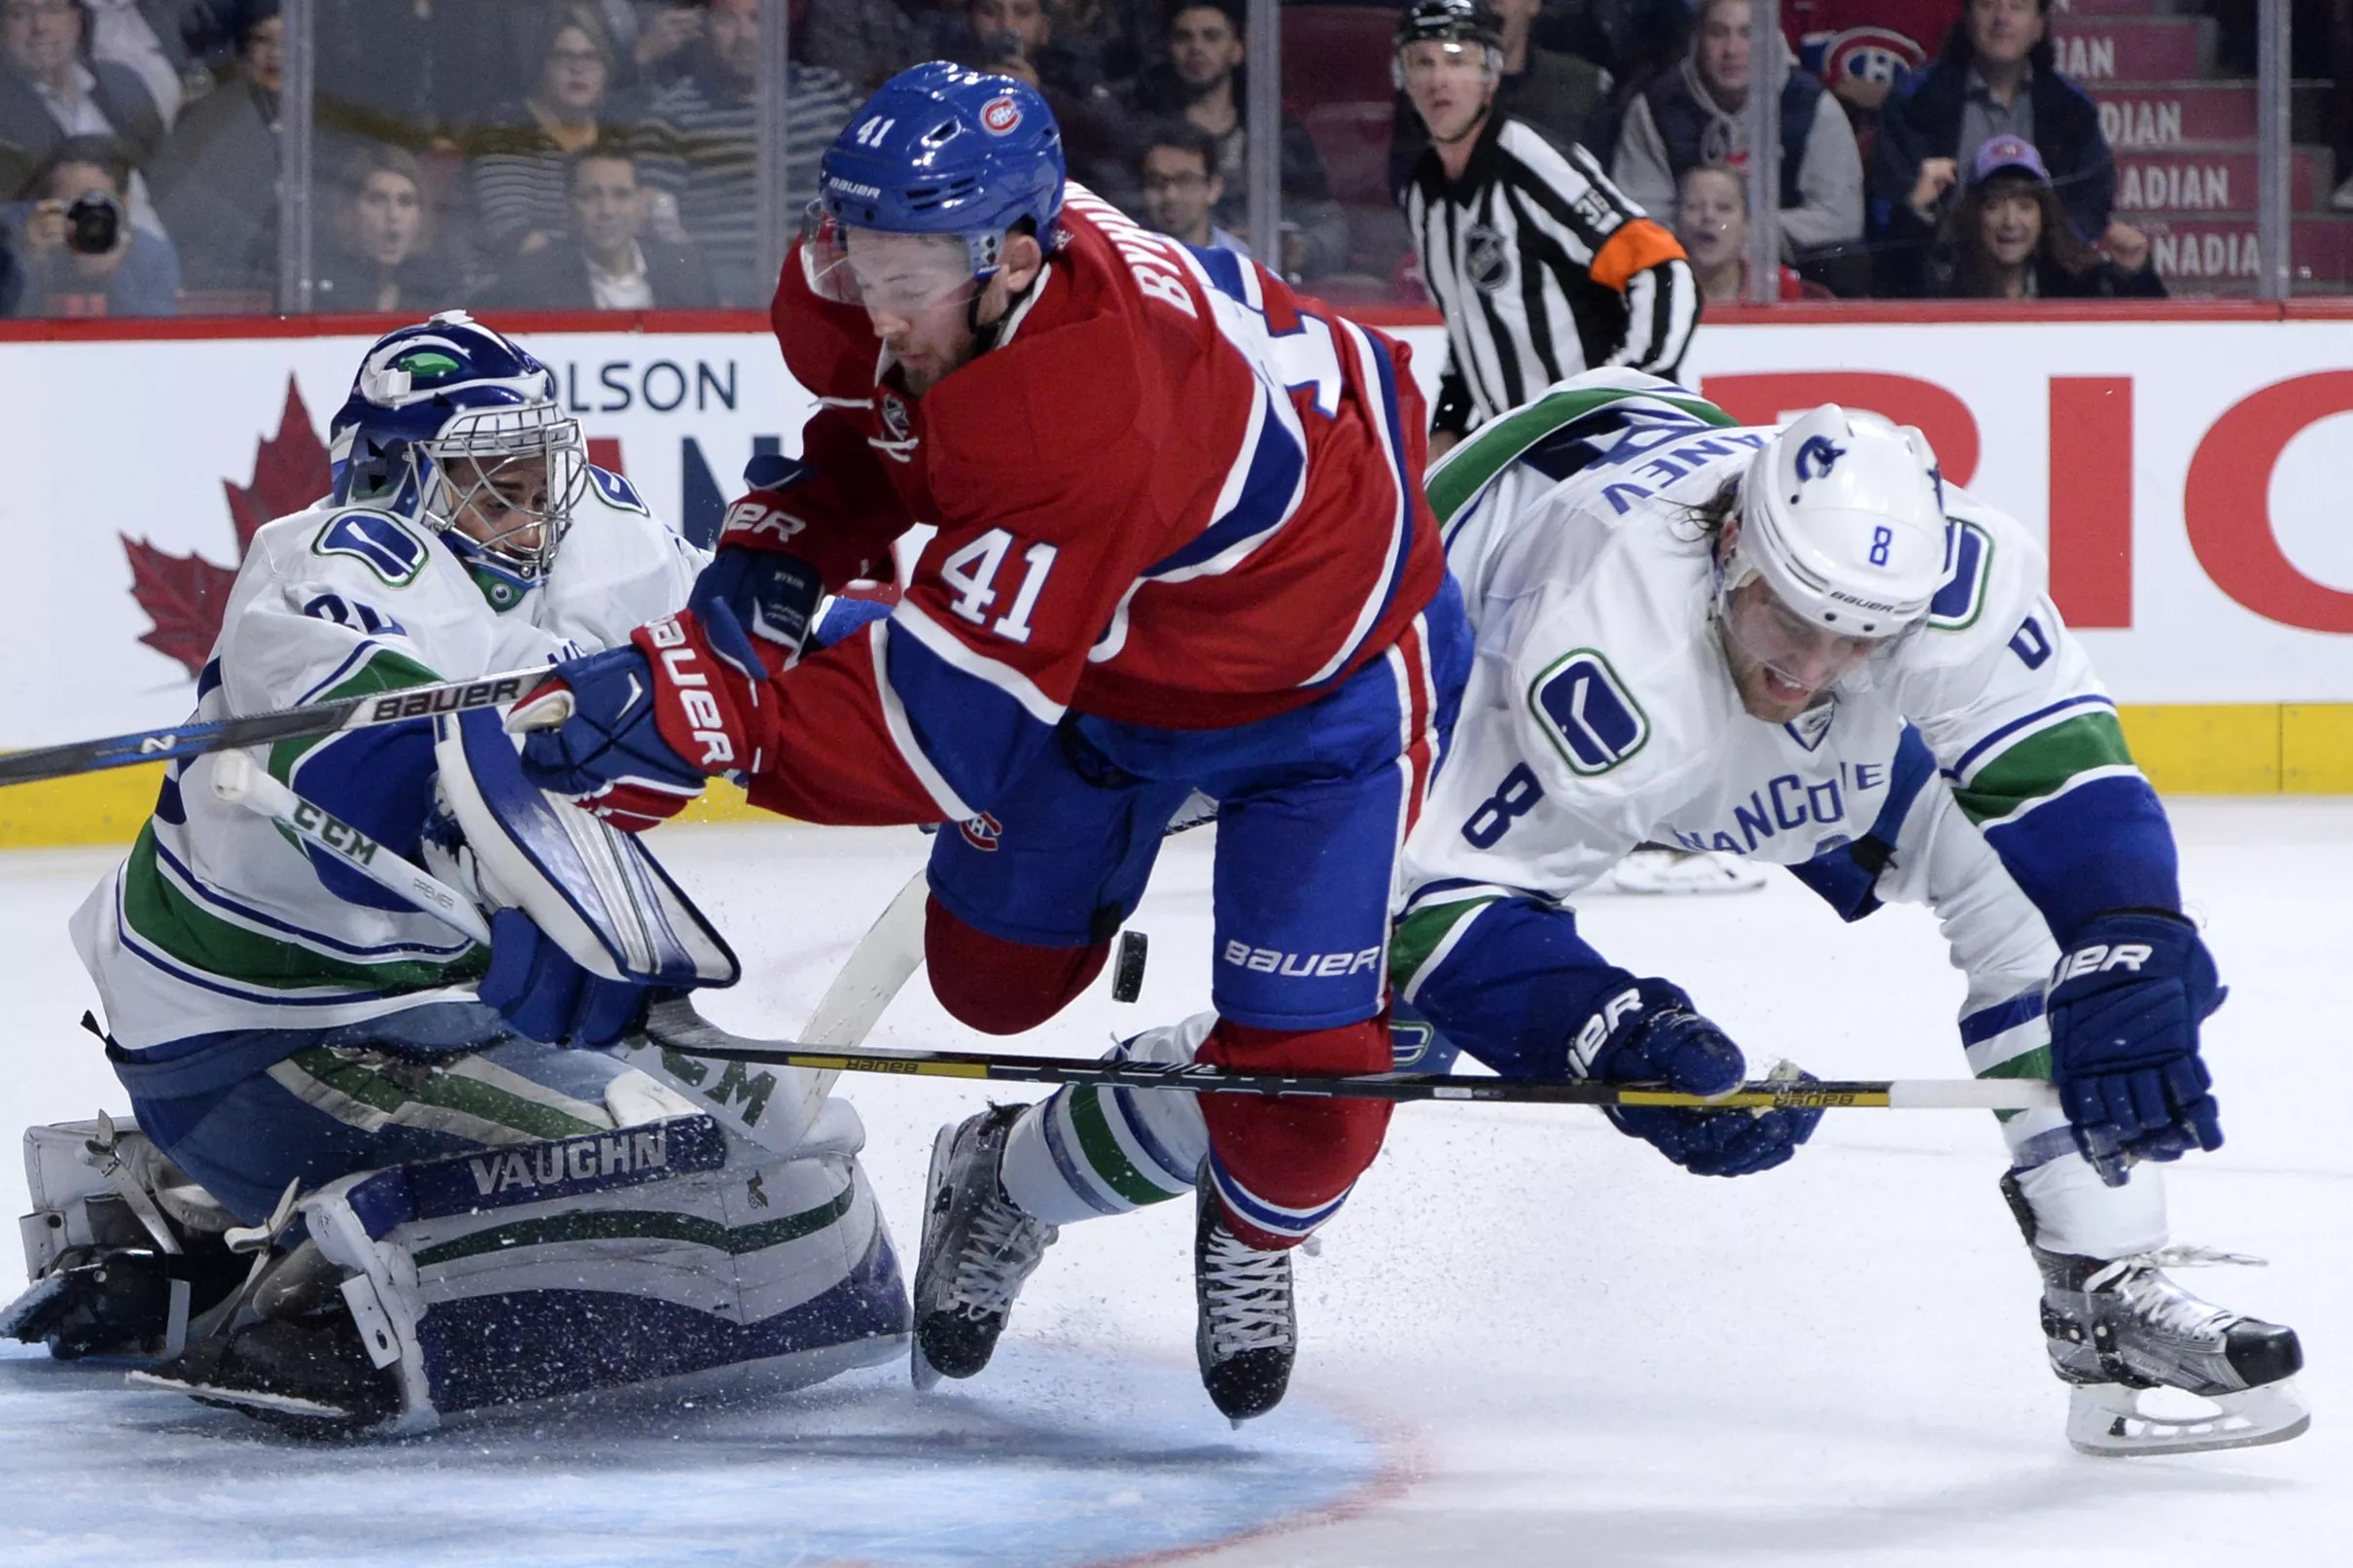 Canadiens vs. Canucks Game preview, start time, Tale of the Tape, and